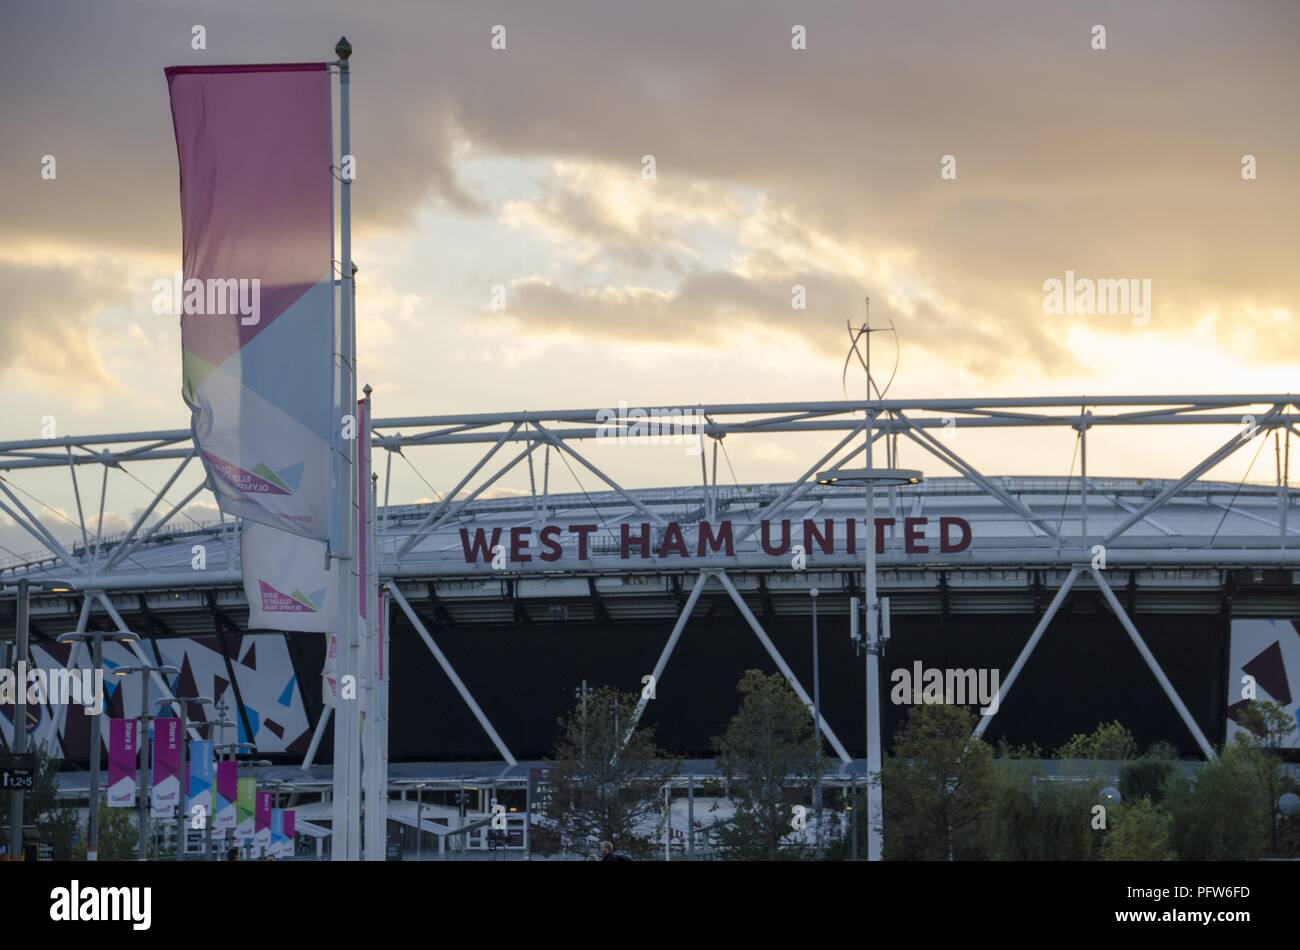 Westham United stadion at the Queen Elizabeth Olympic Park, London, England, October 29, 2017. () Stock Photo